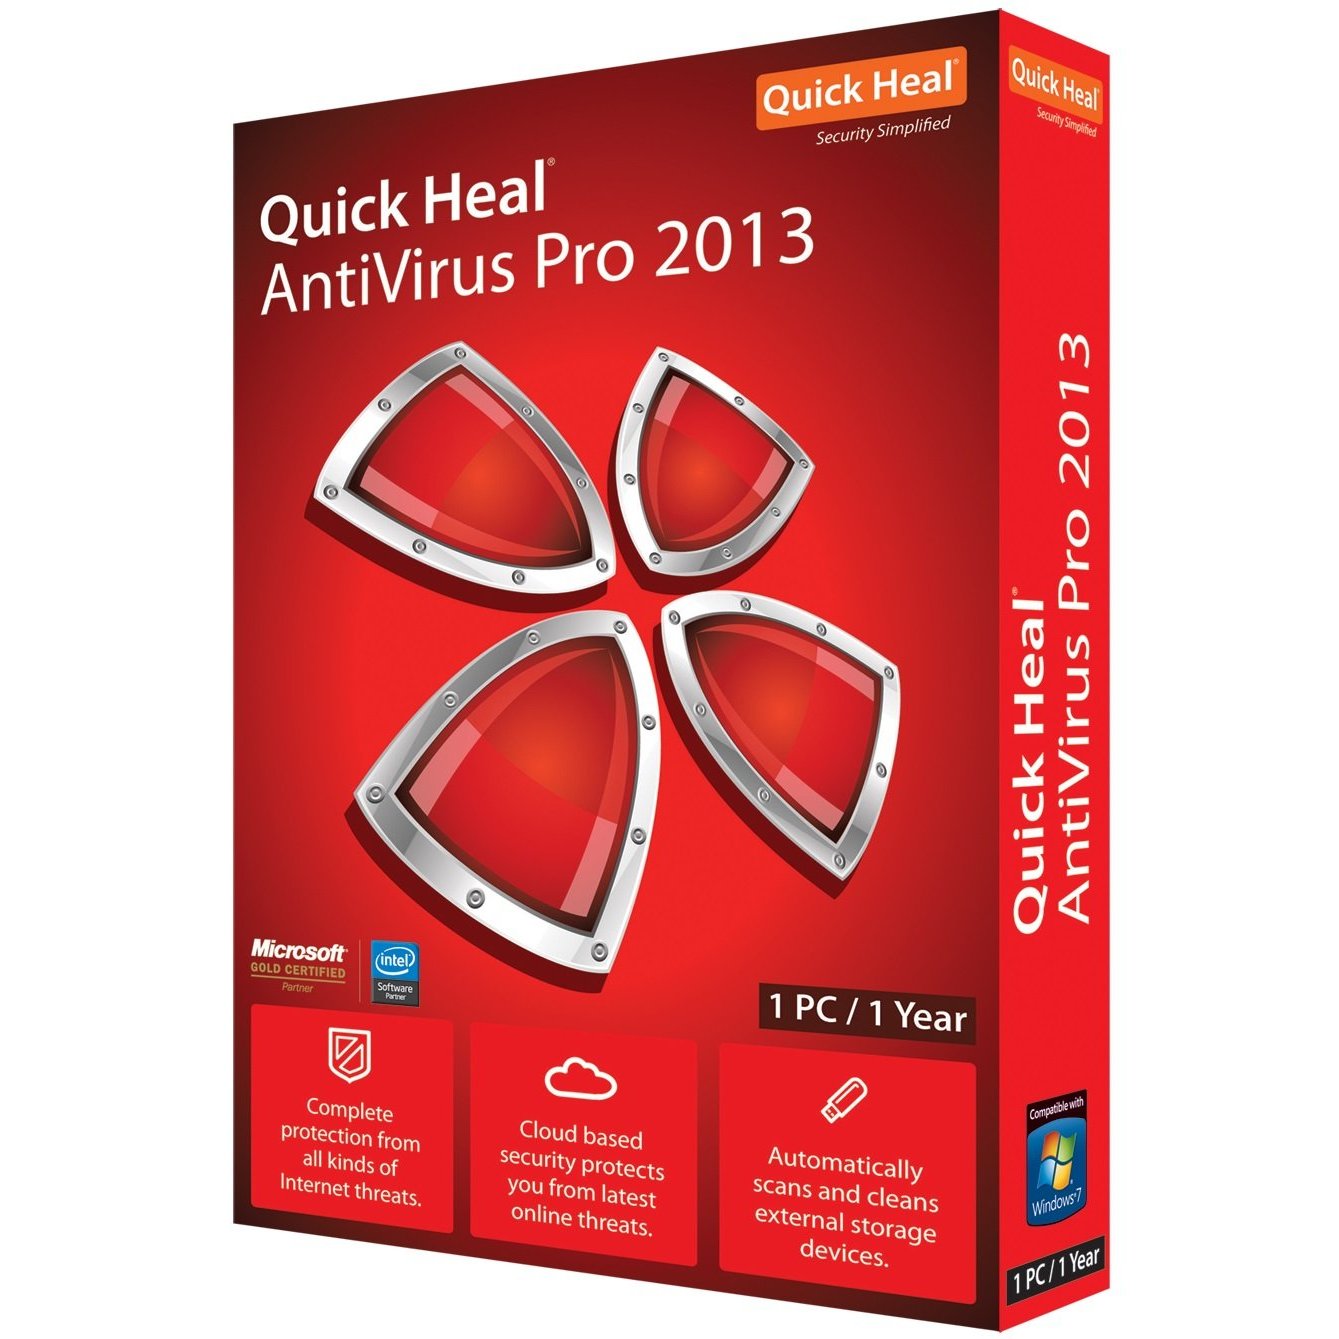 Quick Heal Antivirus Pro 2013 - Protect your PC from